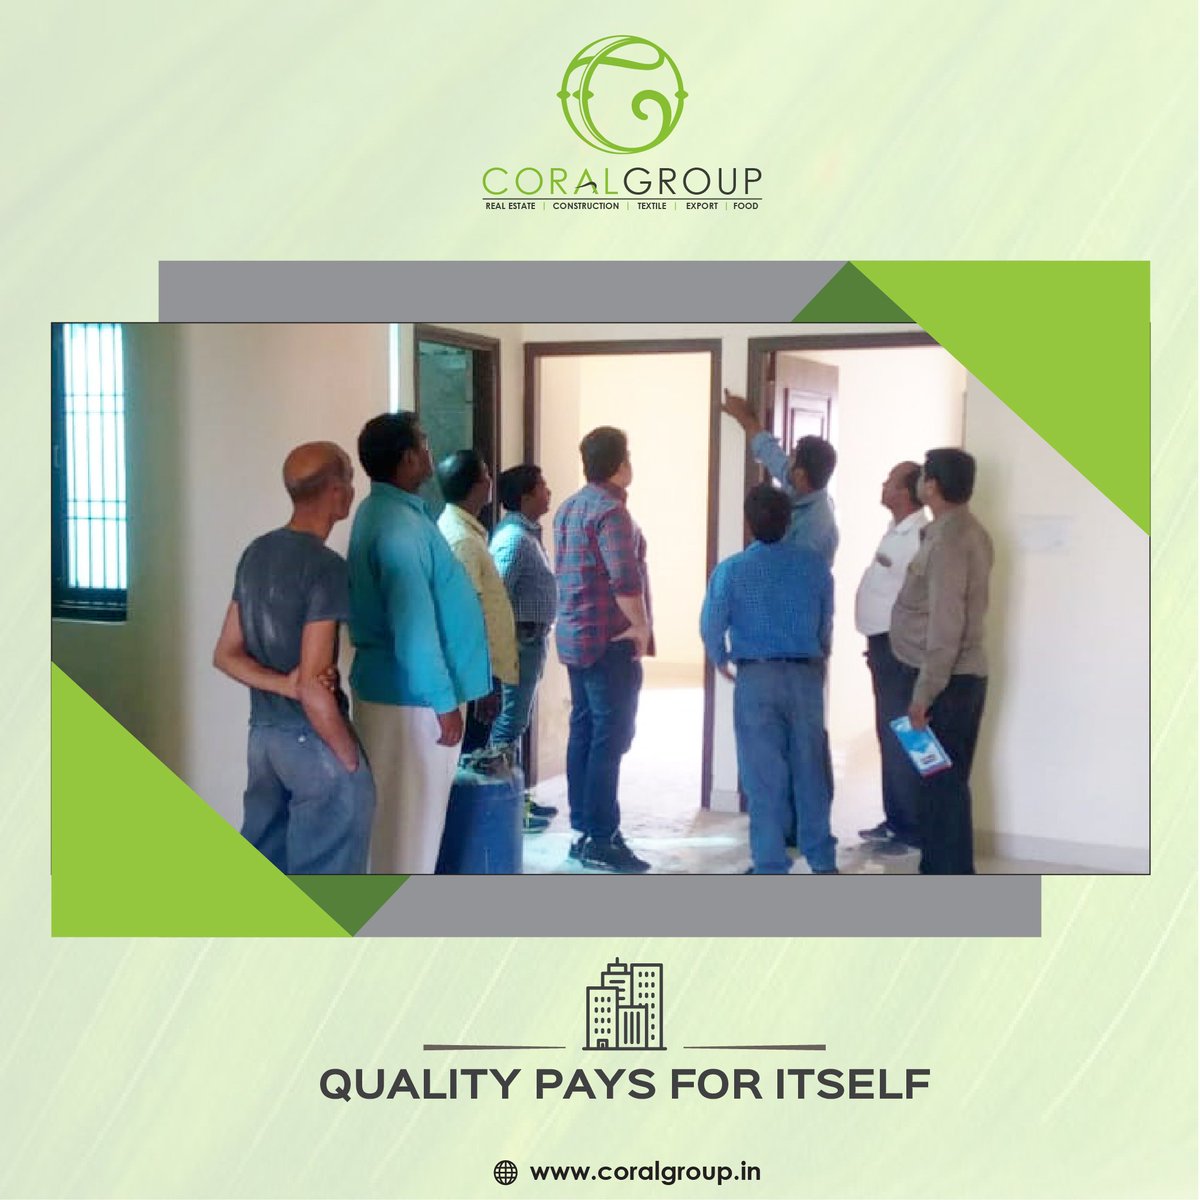 Mr. Khalid Ansari looking over the quality of construction.

To know more Call : +91 542 2397777 or visit : coralgroup.in

#RealEstate #CoralGroup #CoralGreensBuildtech #Varanasi